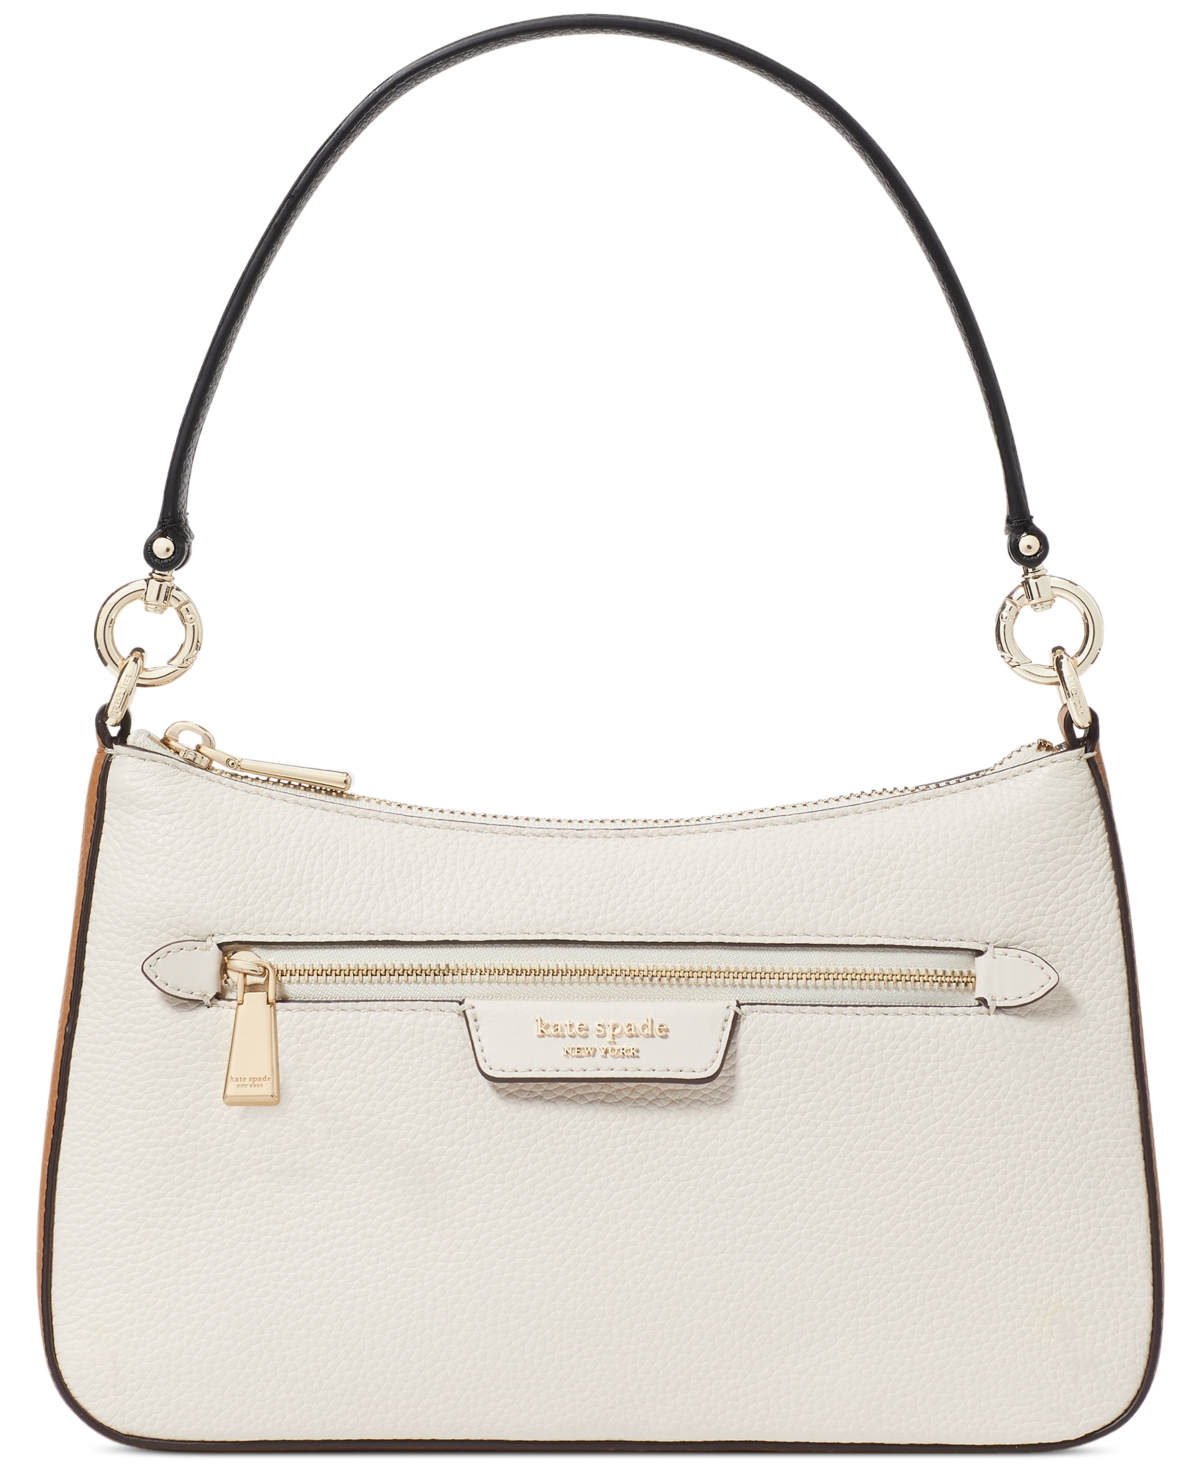 KATE SPADE HUDSON COLORBLOCKED PEBBLED LEATHER SMALL CONVERTIBLE CROSSBODY